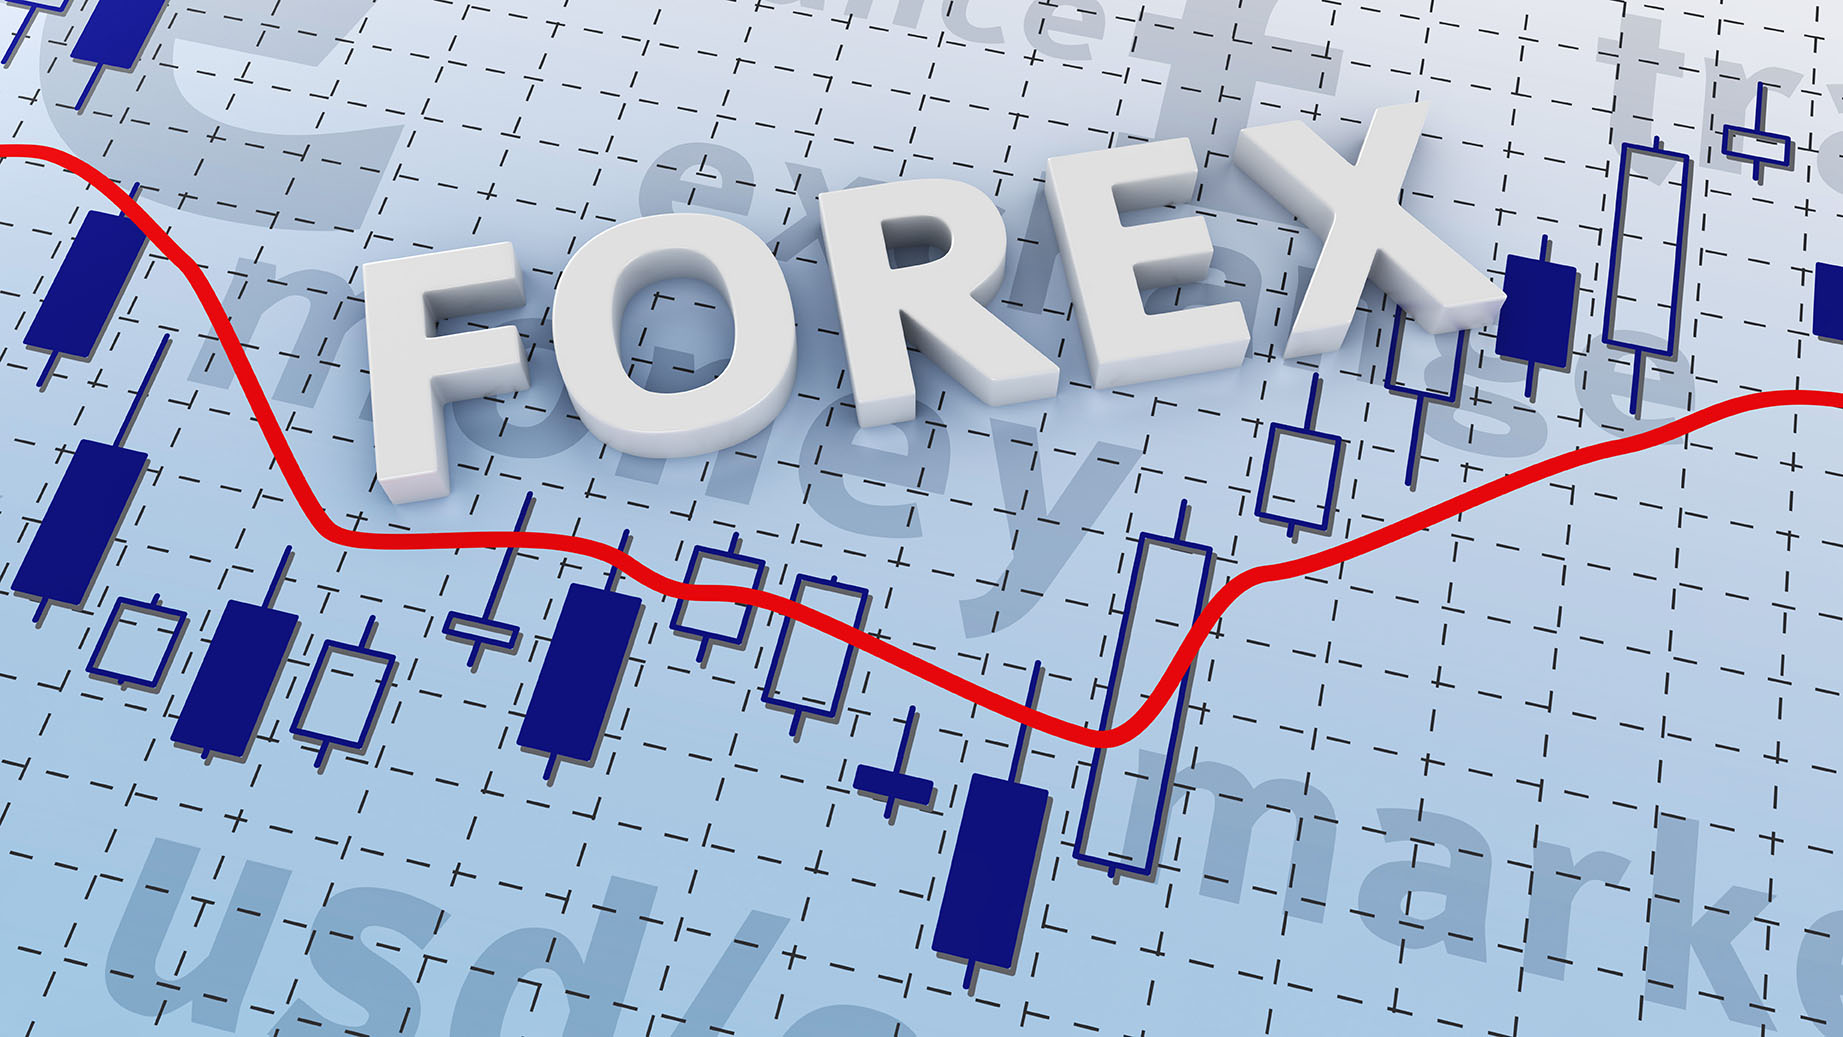 Forex direct